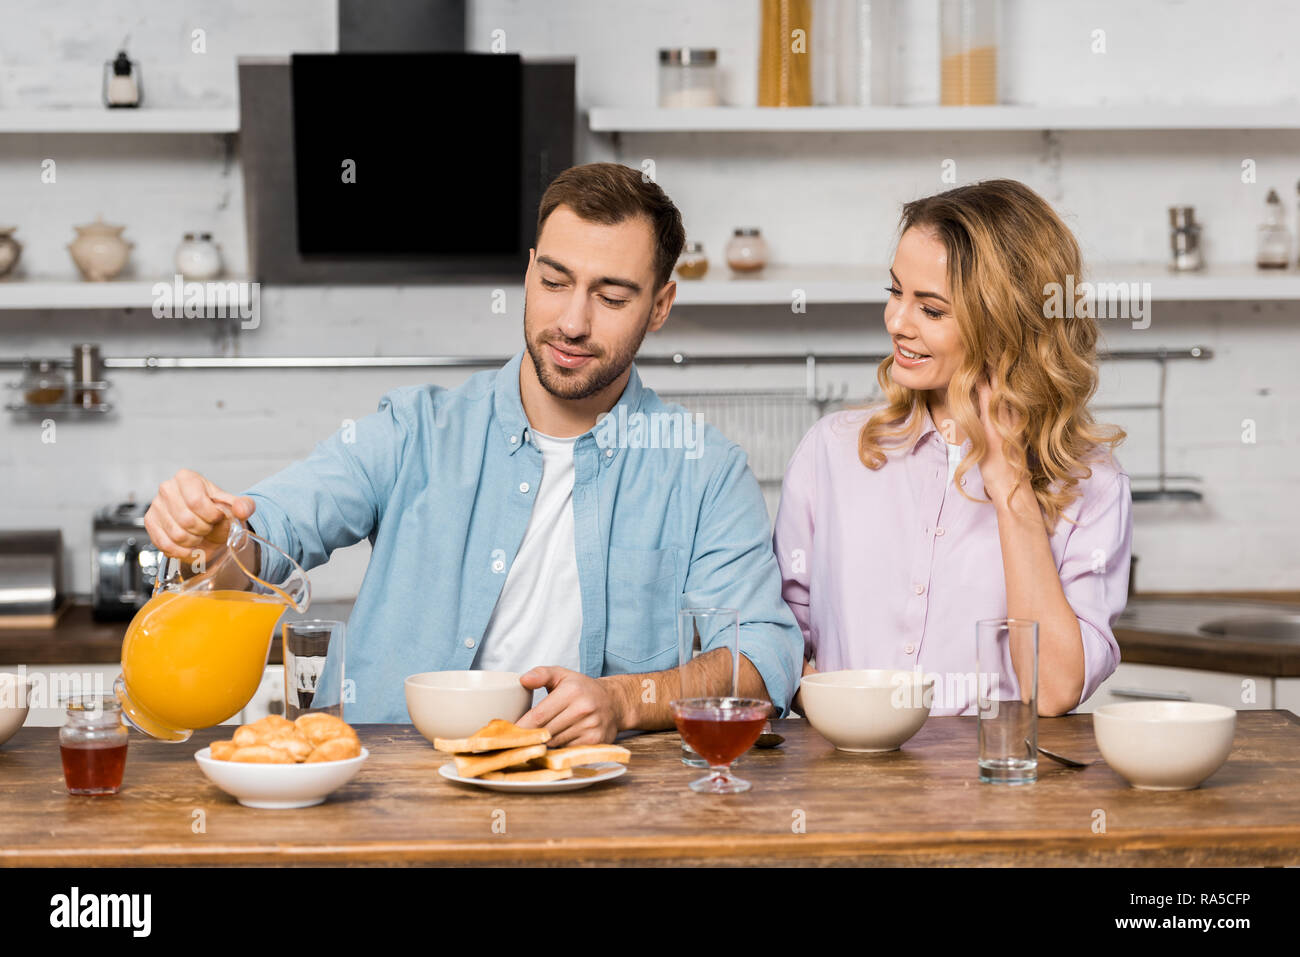 smiling woman looking at handsome husband pouring orange juice in glass on kitchen table Stock Photo